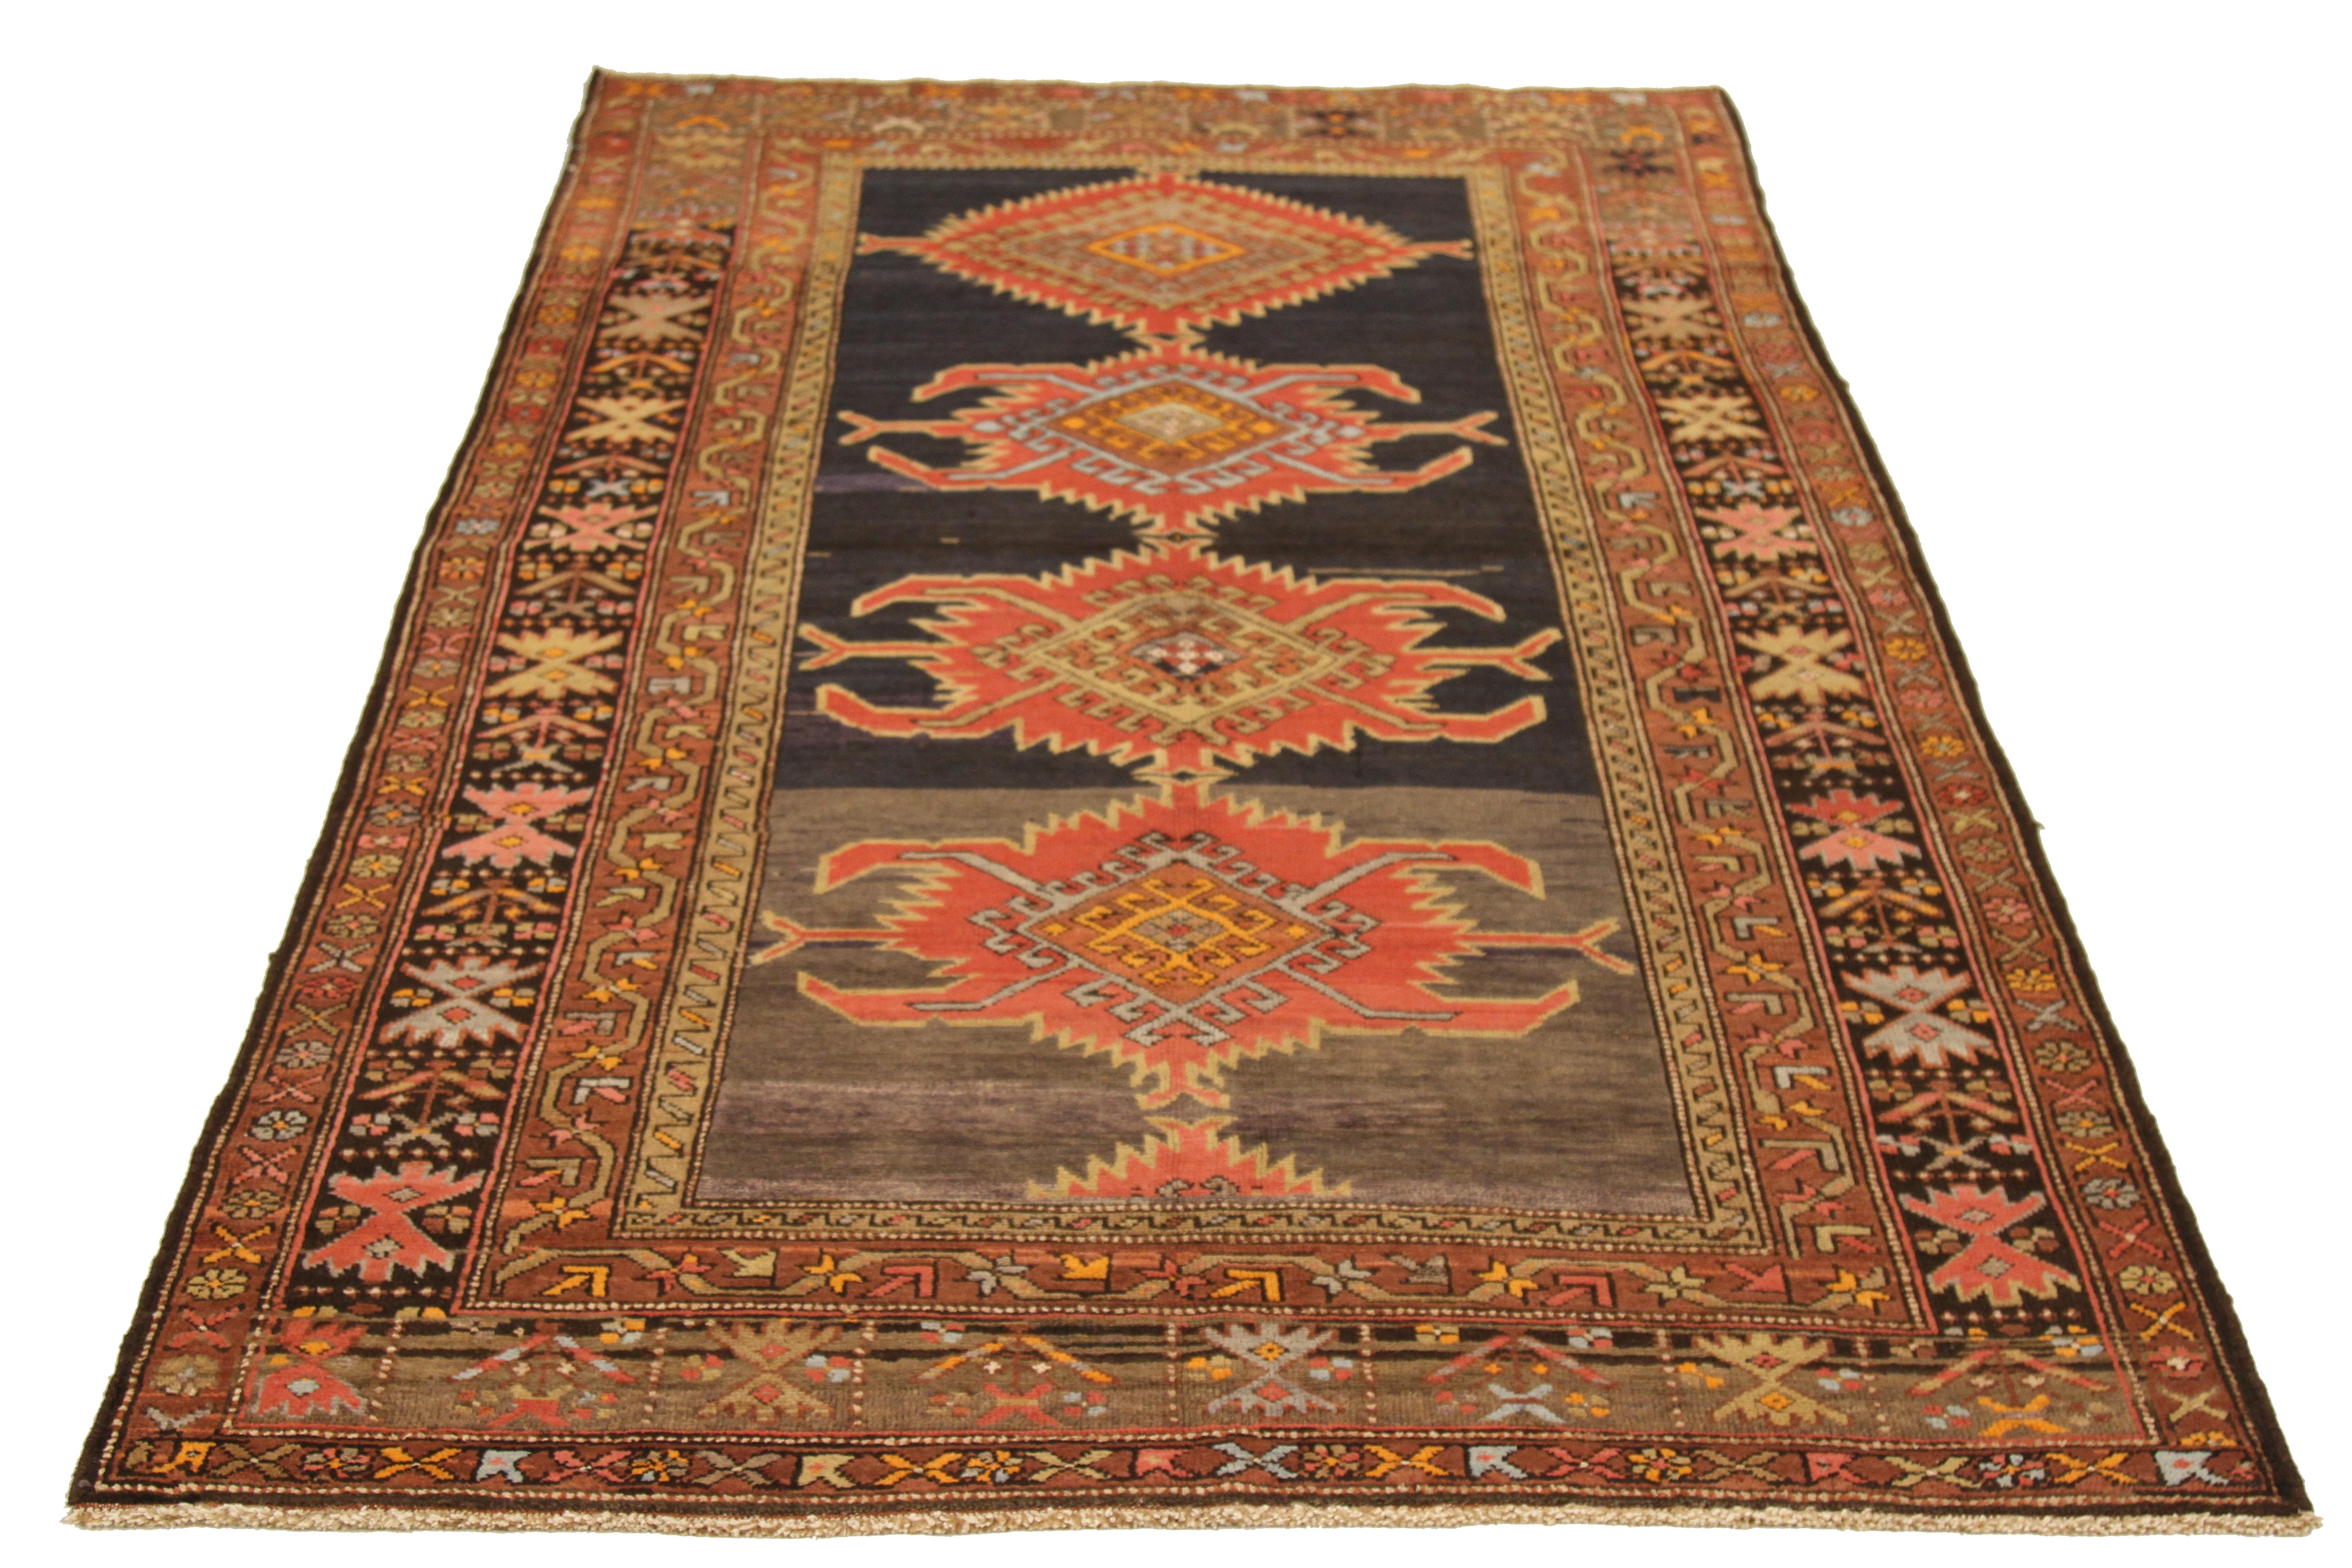 Mid-20th century hand-woven Russian area rug made from fine wool and all-natural vegetable dyes that are safe for people and pets. This beautiful piece features ornate tribal patterns which Kazak rugs are known for. 

This area rug has dimensions